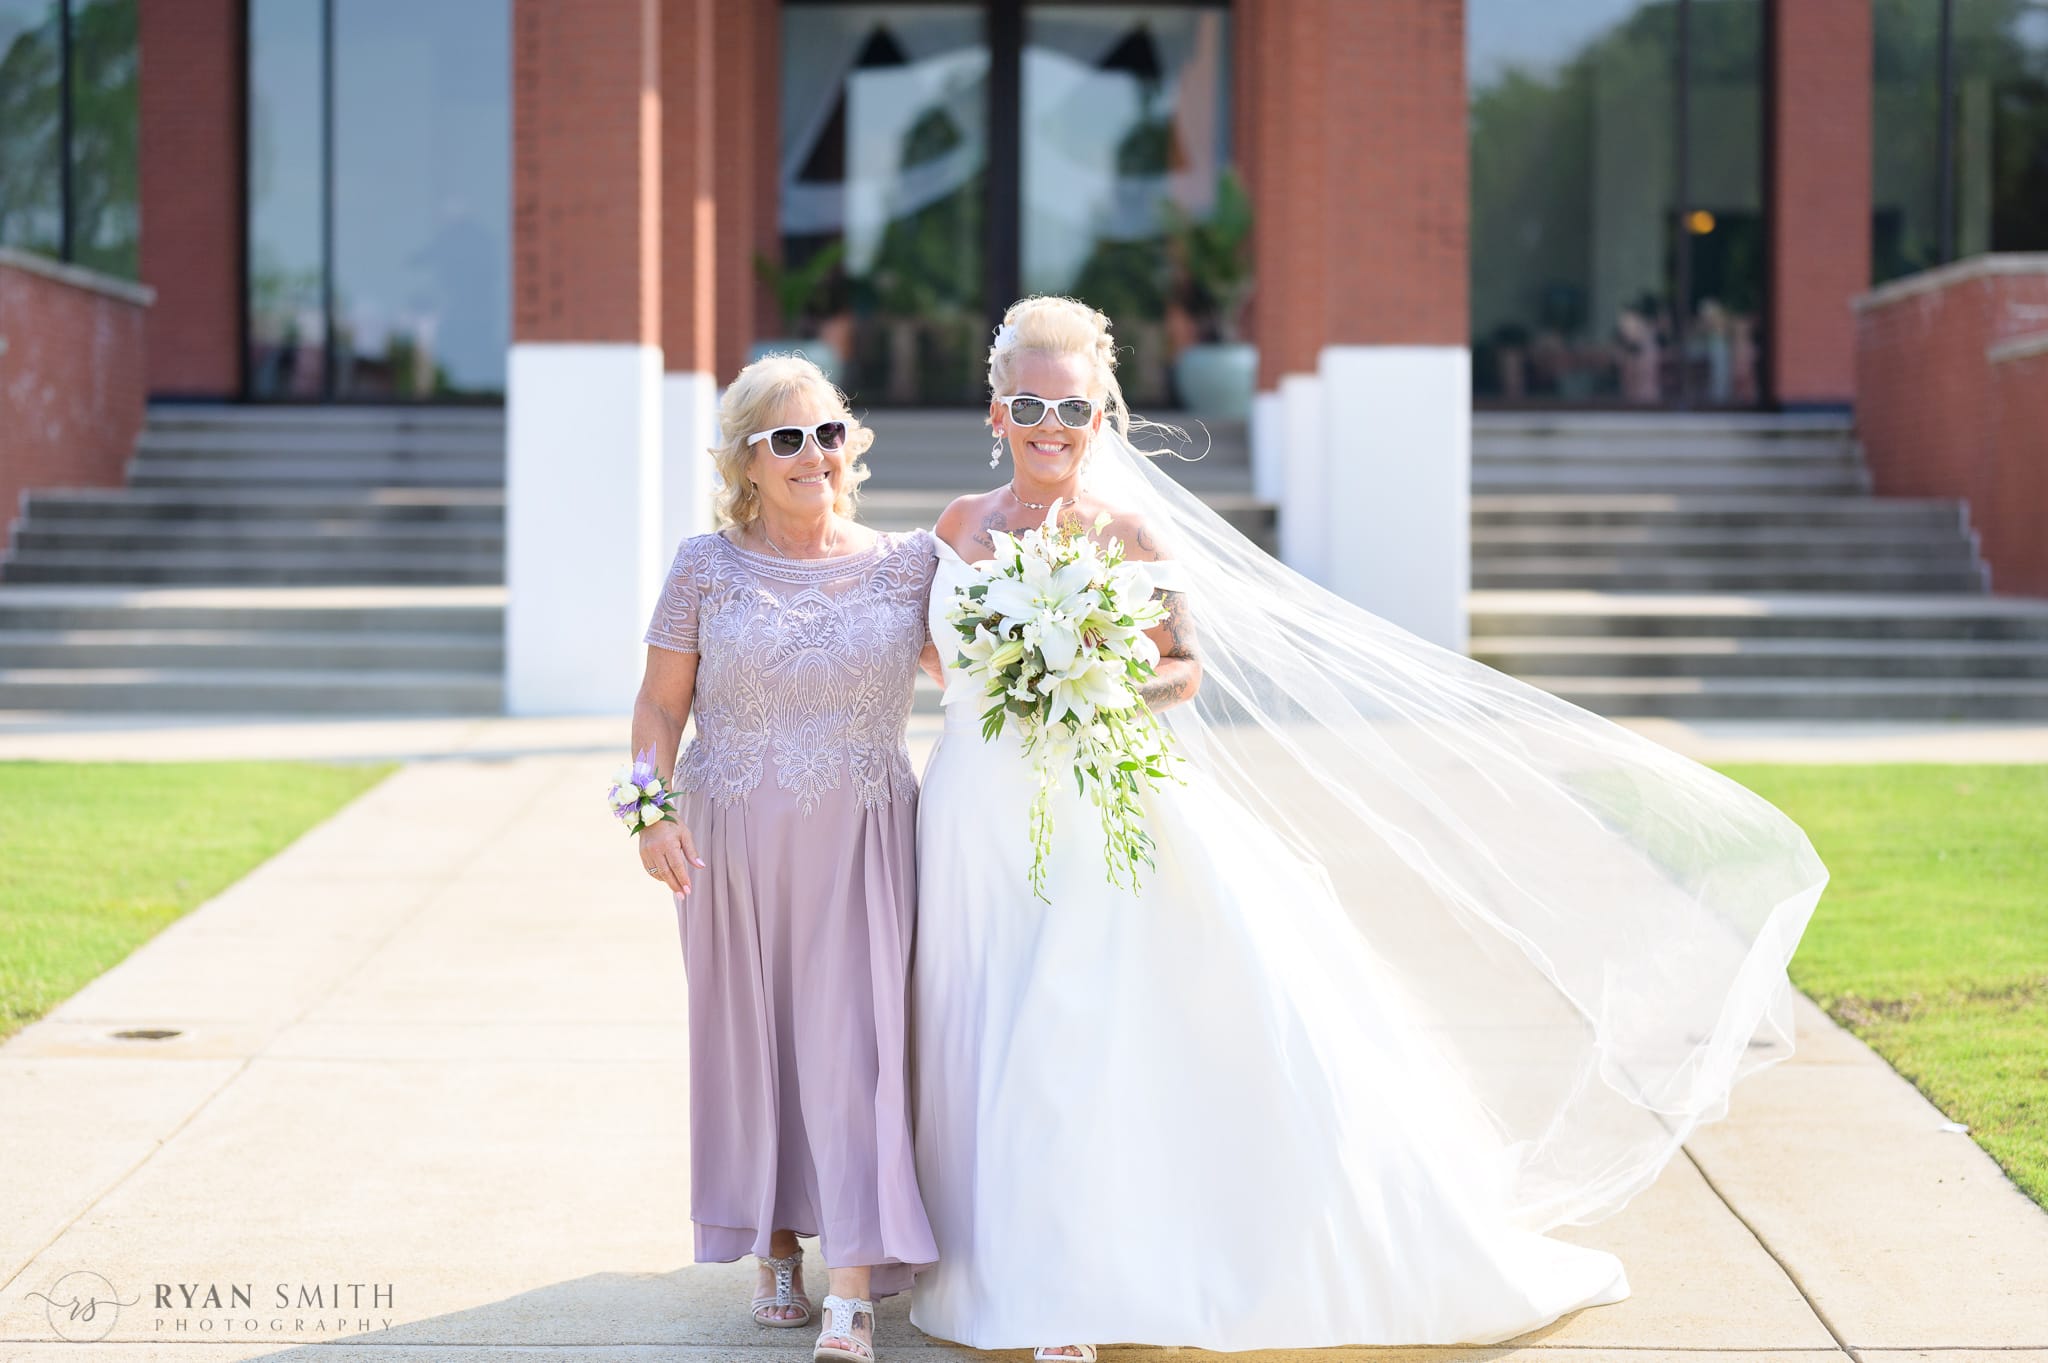 Mother walking bride down the aisle with white sunglasses  - Wild Wing Plantation